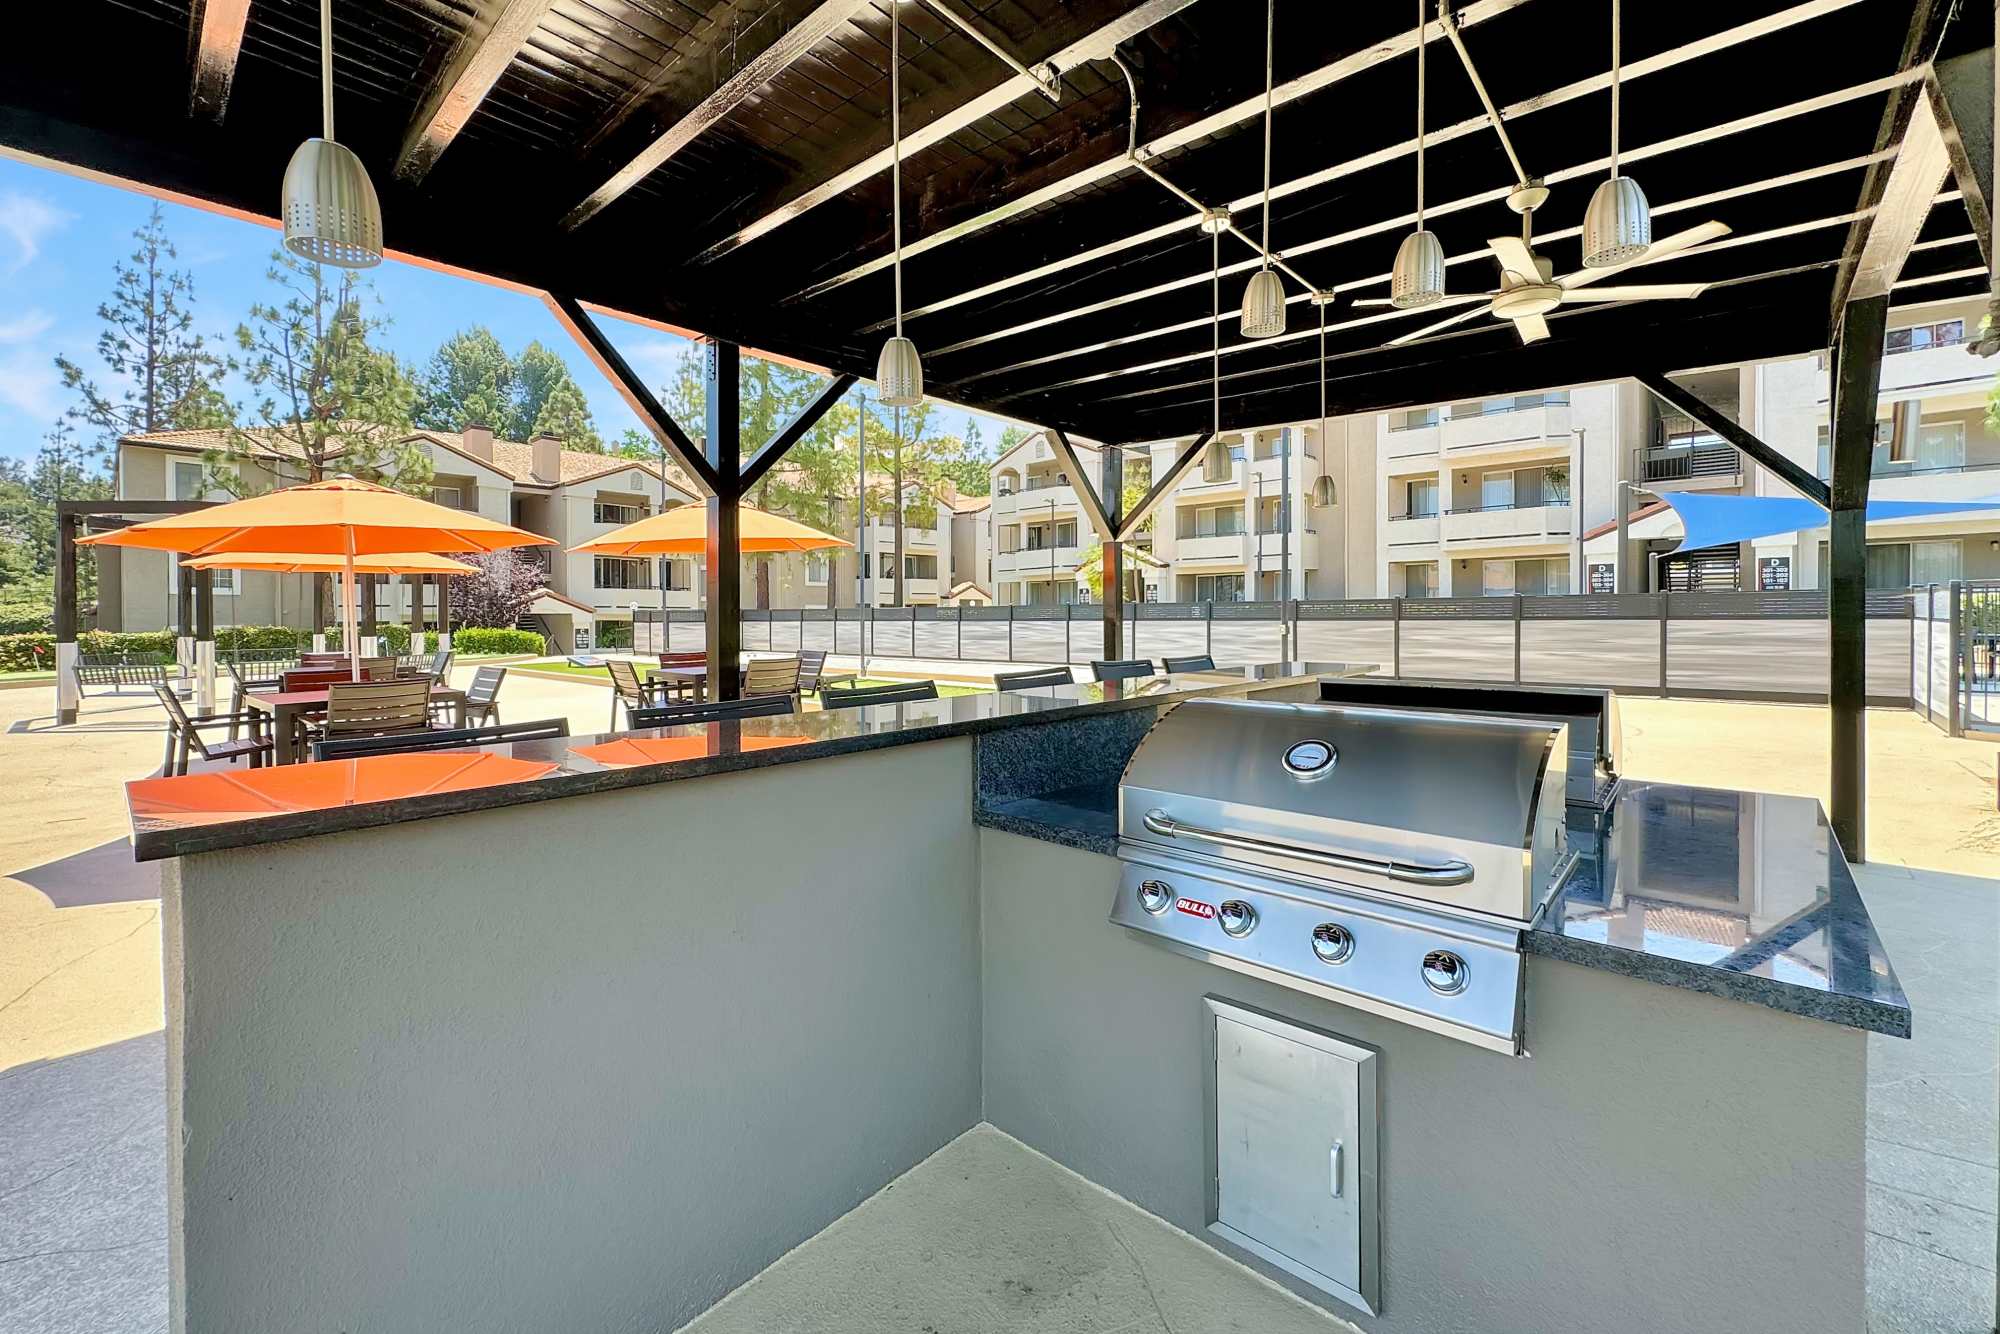 Covered BBQ area with bar top seating and fans at Sierra Del Oro Apartments in Corona, California